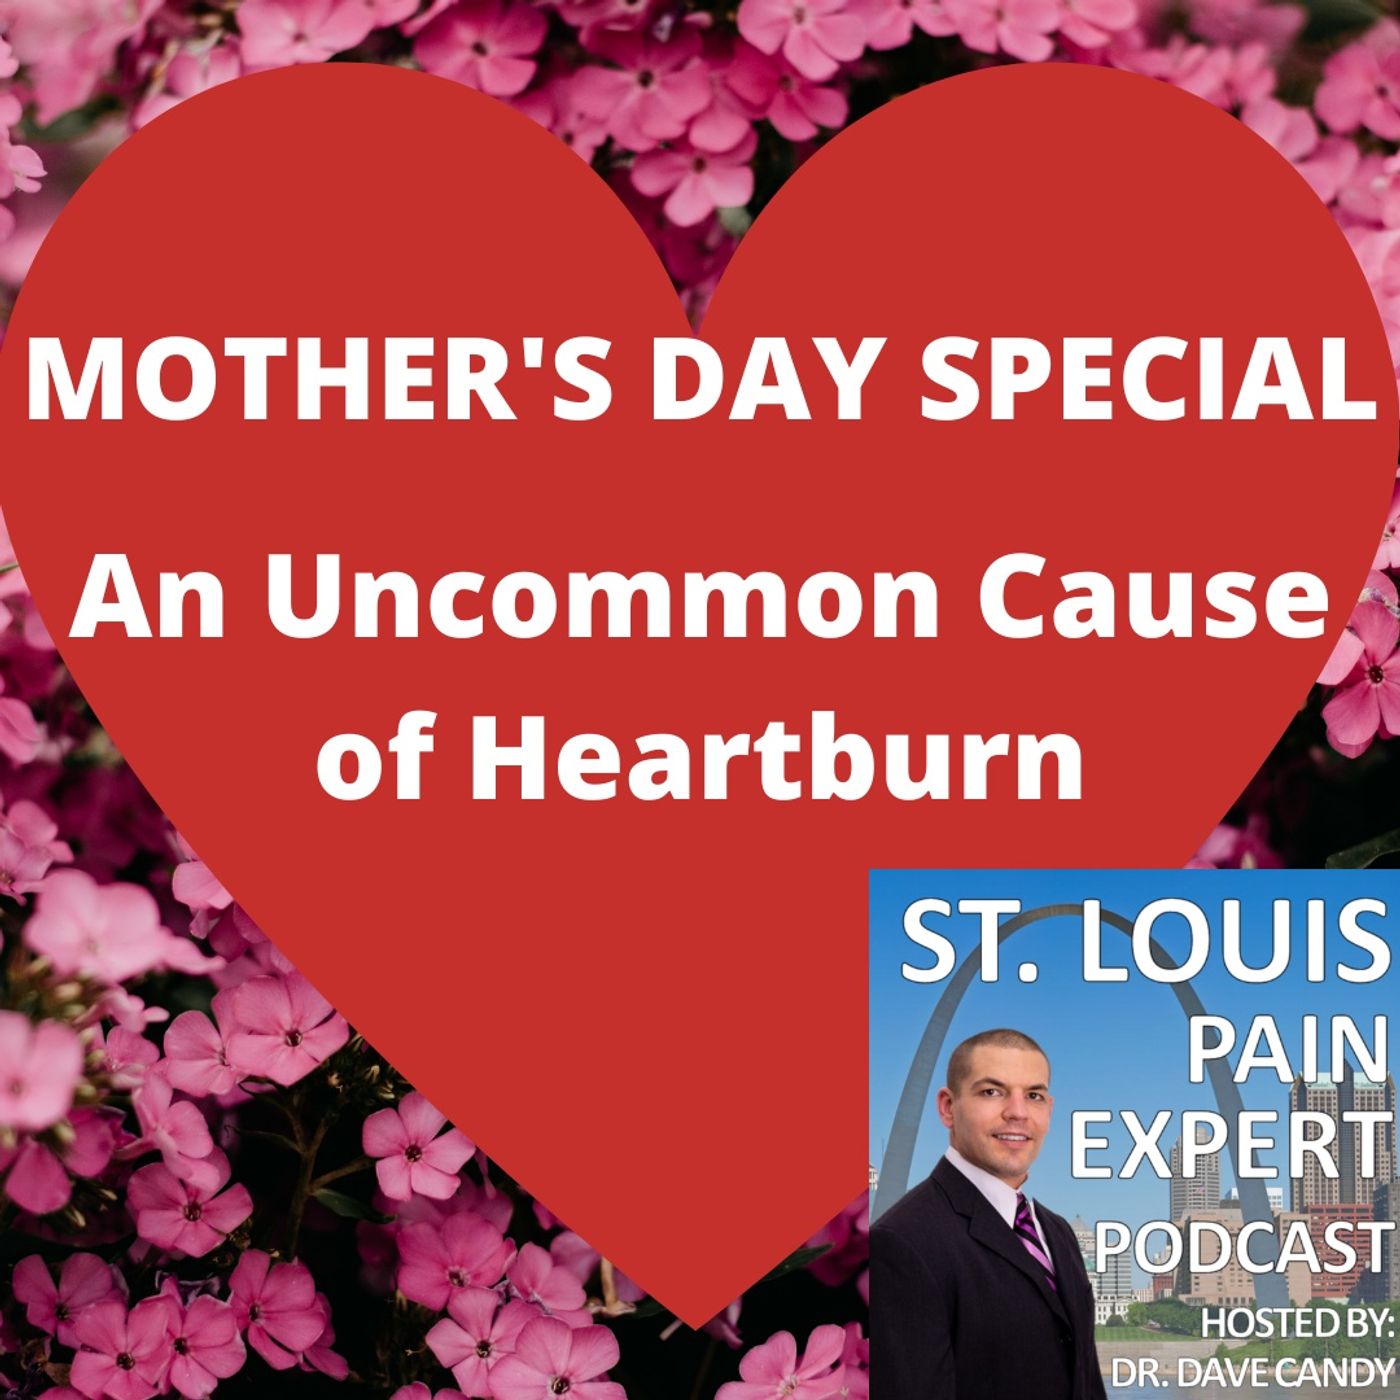 Mother's Day Special - An Uncommon Cause Of Heartburn